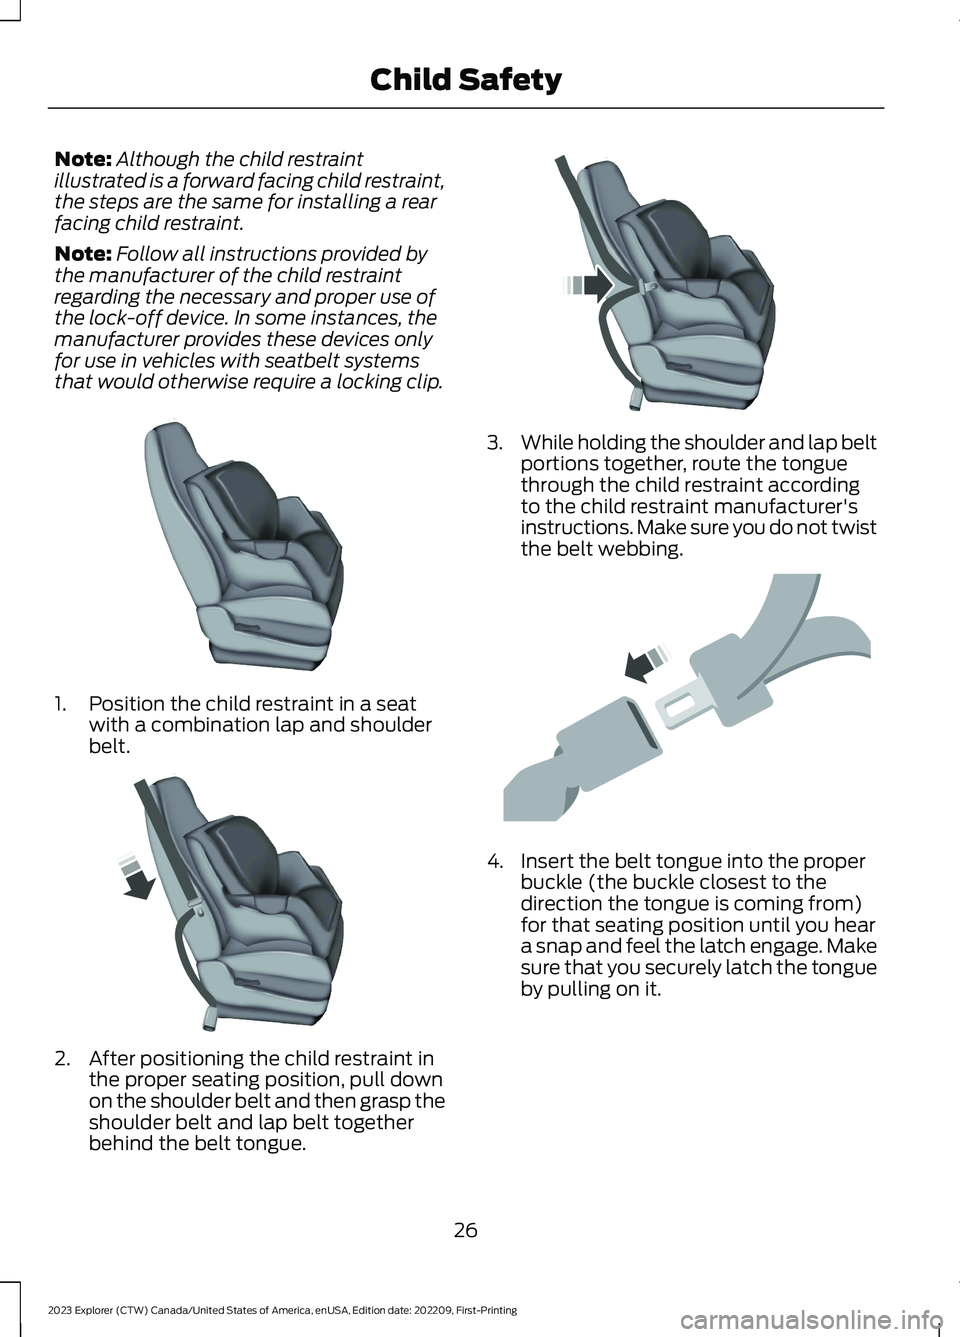 FORD EXPLORER 2023  Owners Manual Note:Although the child restraintillustrated is a forward facing child restraint,the steps are the same for installing a rearfacing child restraint.
Note:Follow all instructions provided bythe manufac